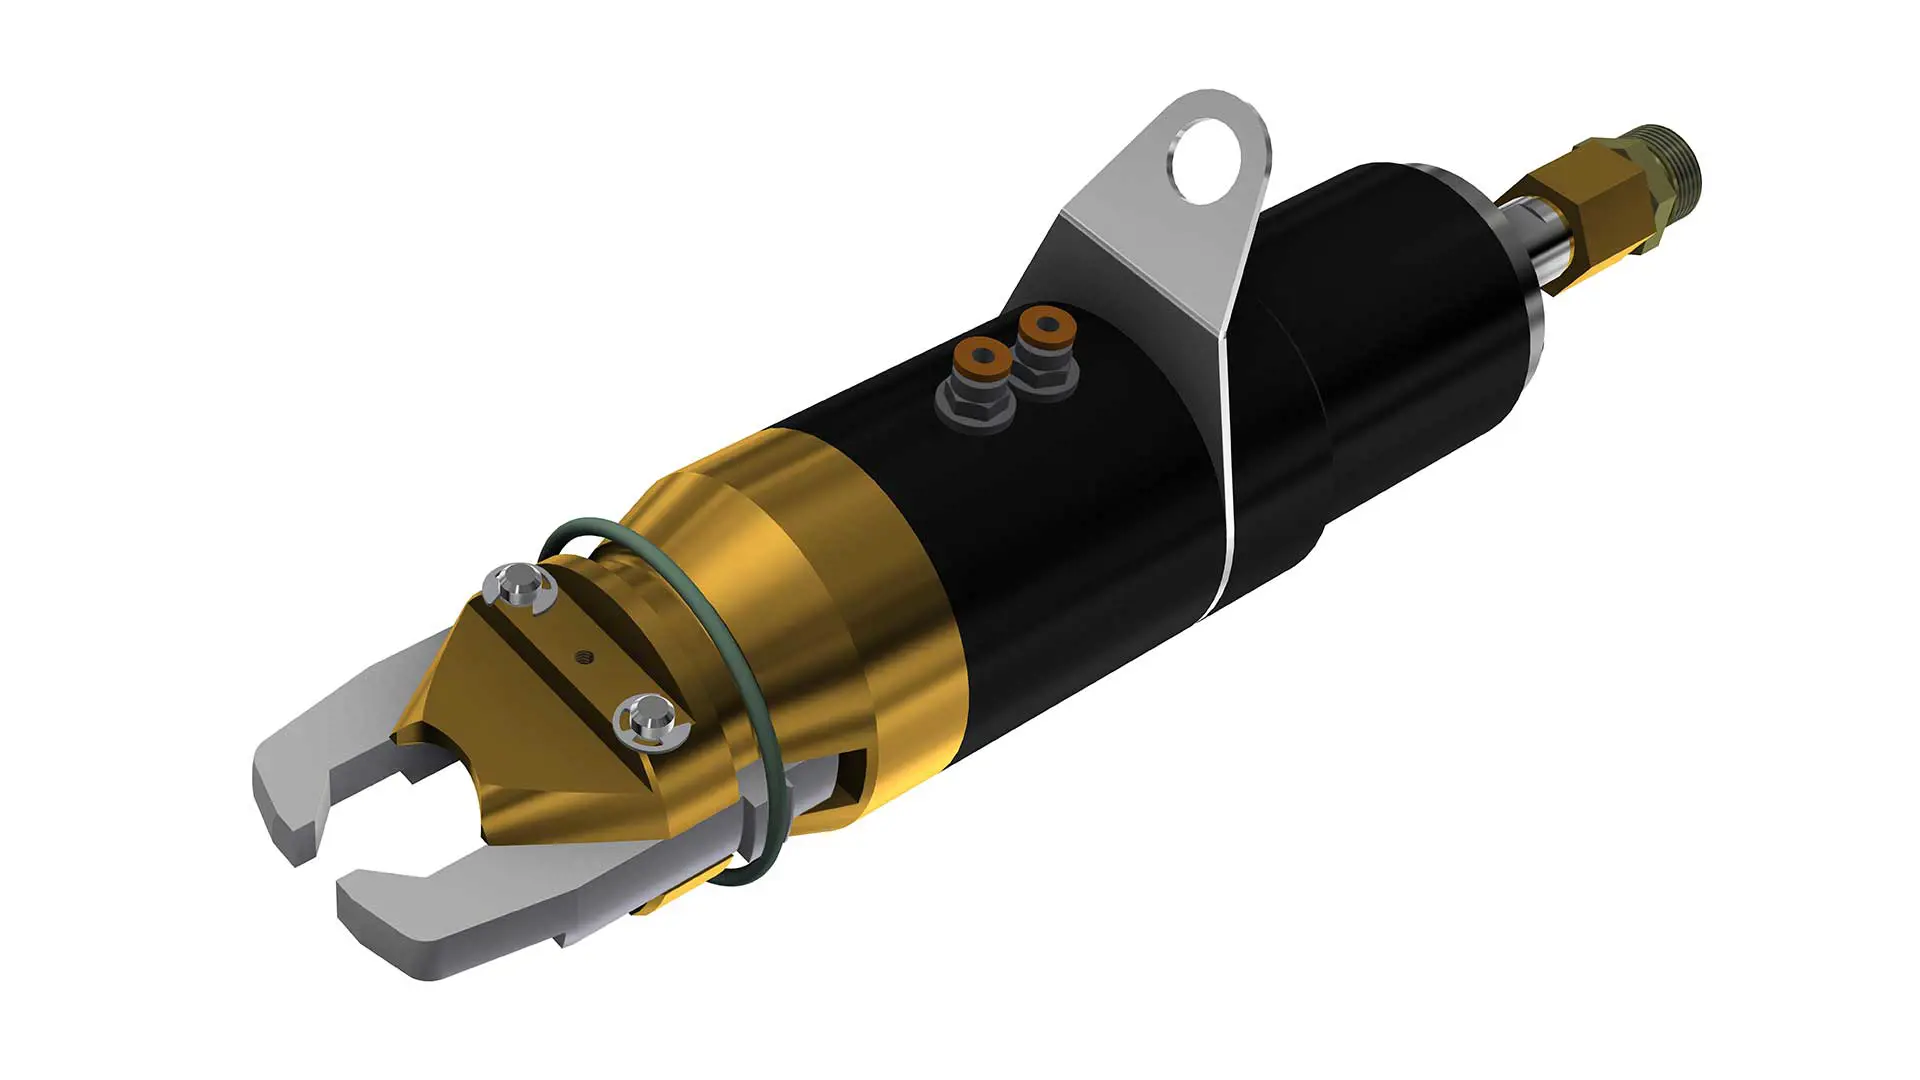 3D illustration of semi-automatic filling head with clamping jaws for screw valves